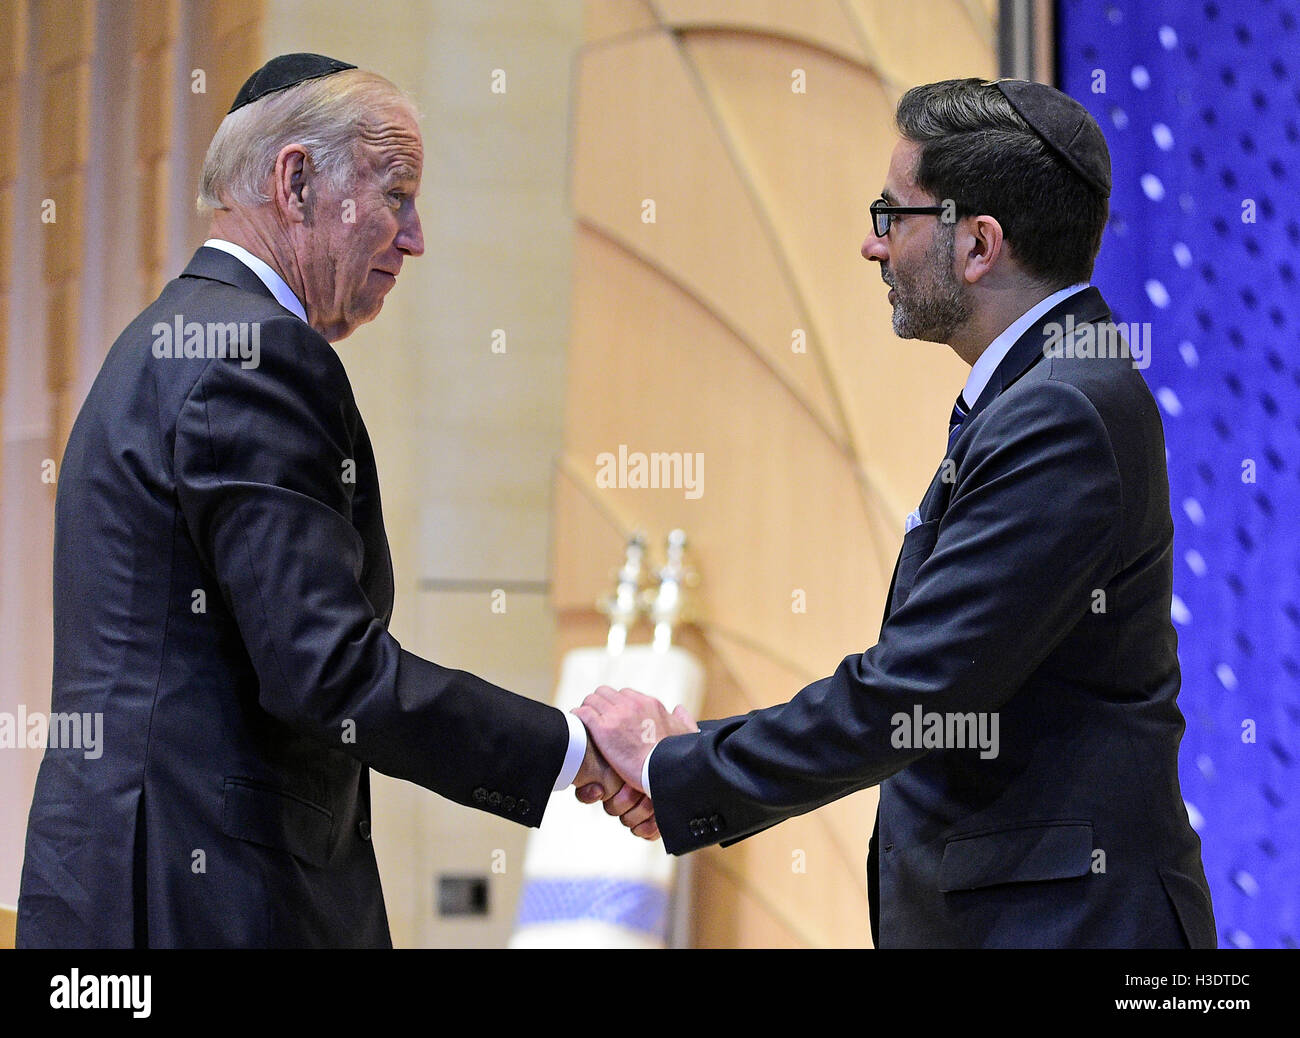 United States Vice President Joe Biden is welcomed by Rabbi Gil Steinlauf of Adas Israel Congregation prior to making remarks at the official National Memorial Service for Shimon Peres in the synagogue in Washington, DC on October 6, 2016.   Credit: Ron Sachs / CNP /MediaPunch Stock Photo